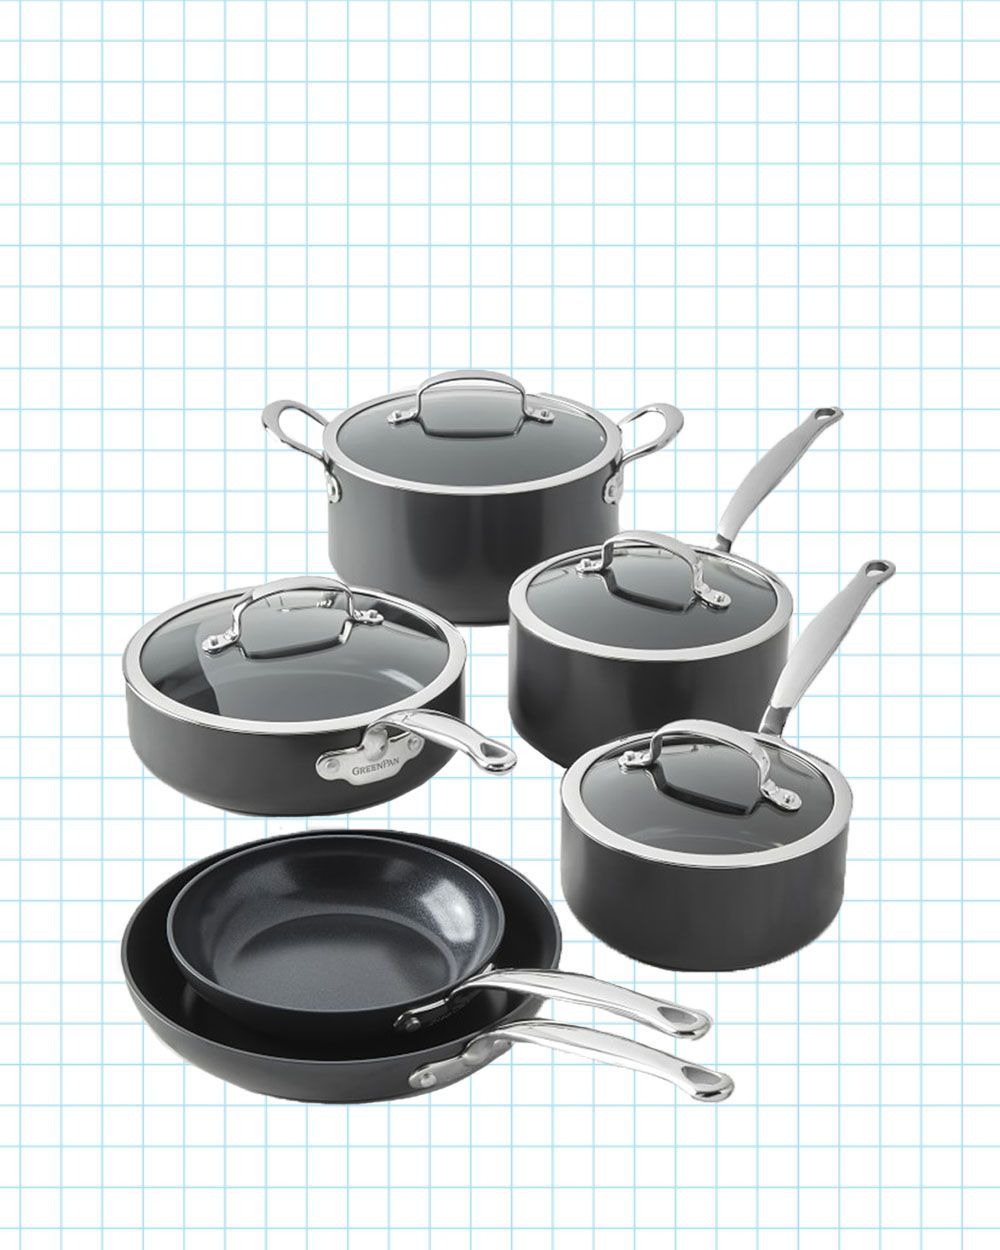 5 Best Ceramic Cookware Sets to Buy in 2019, According to Kitchen